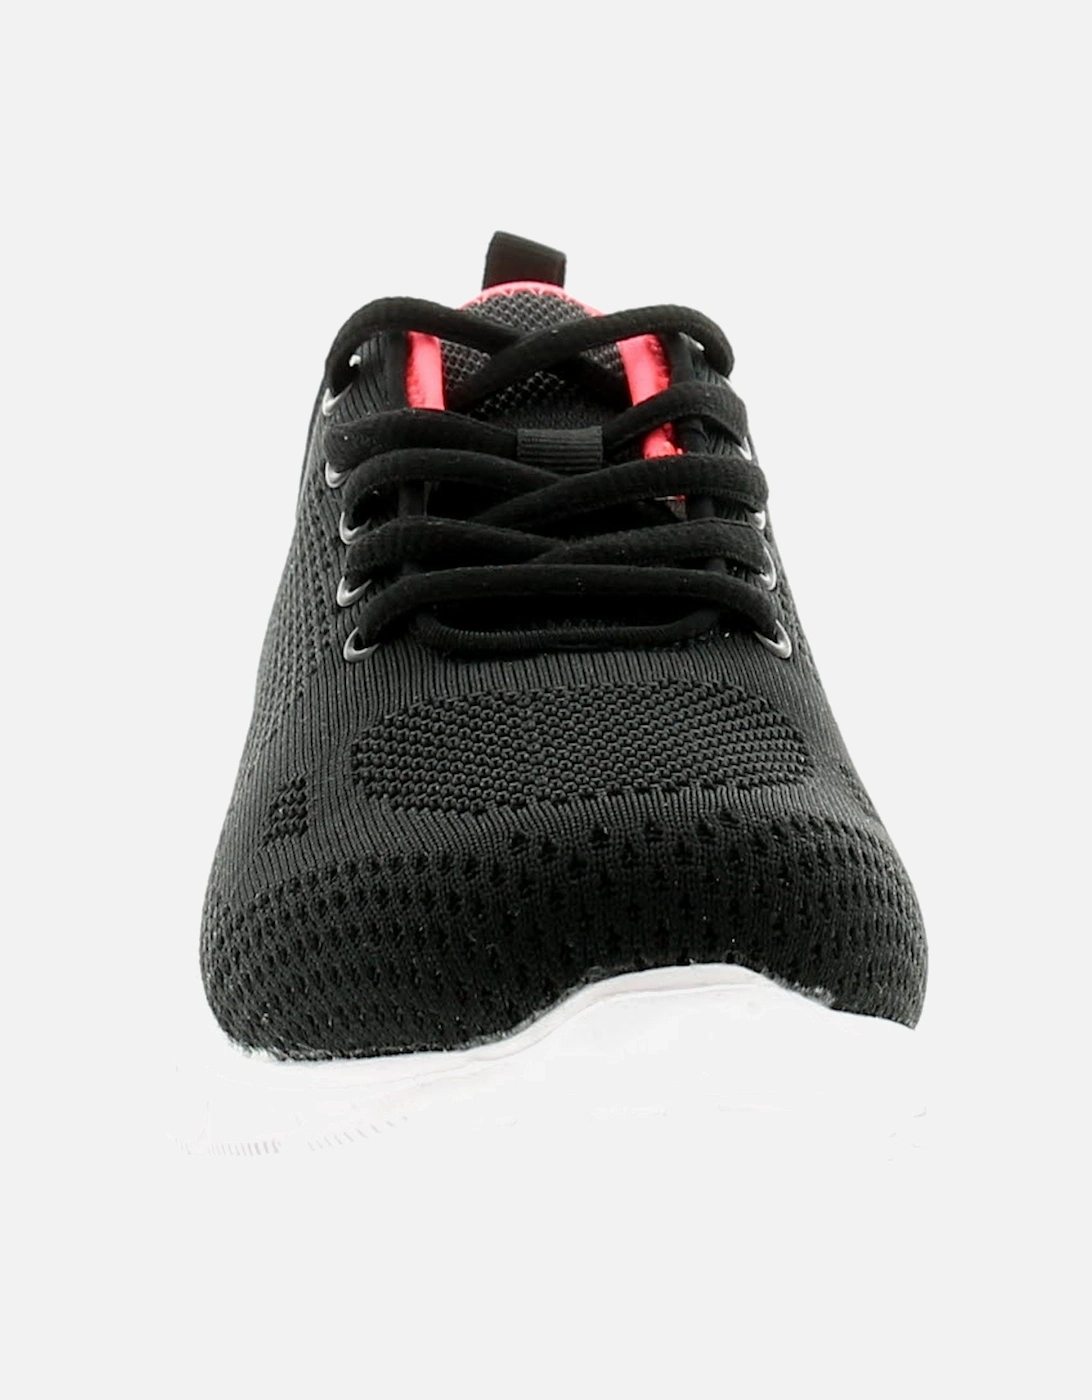 Womens Trainers Rebound Lace Up black UK Size